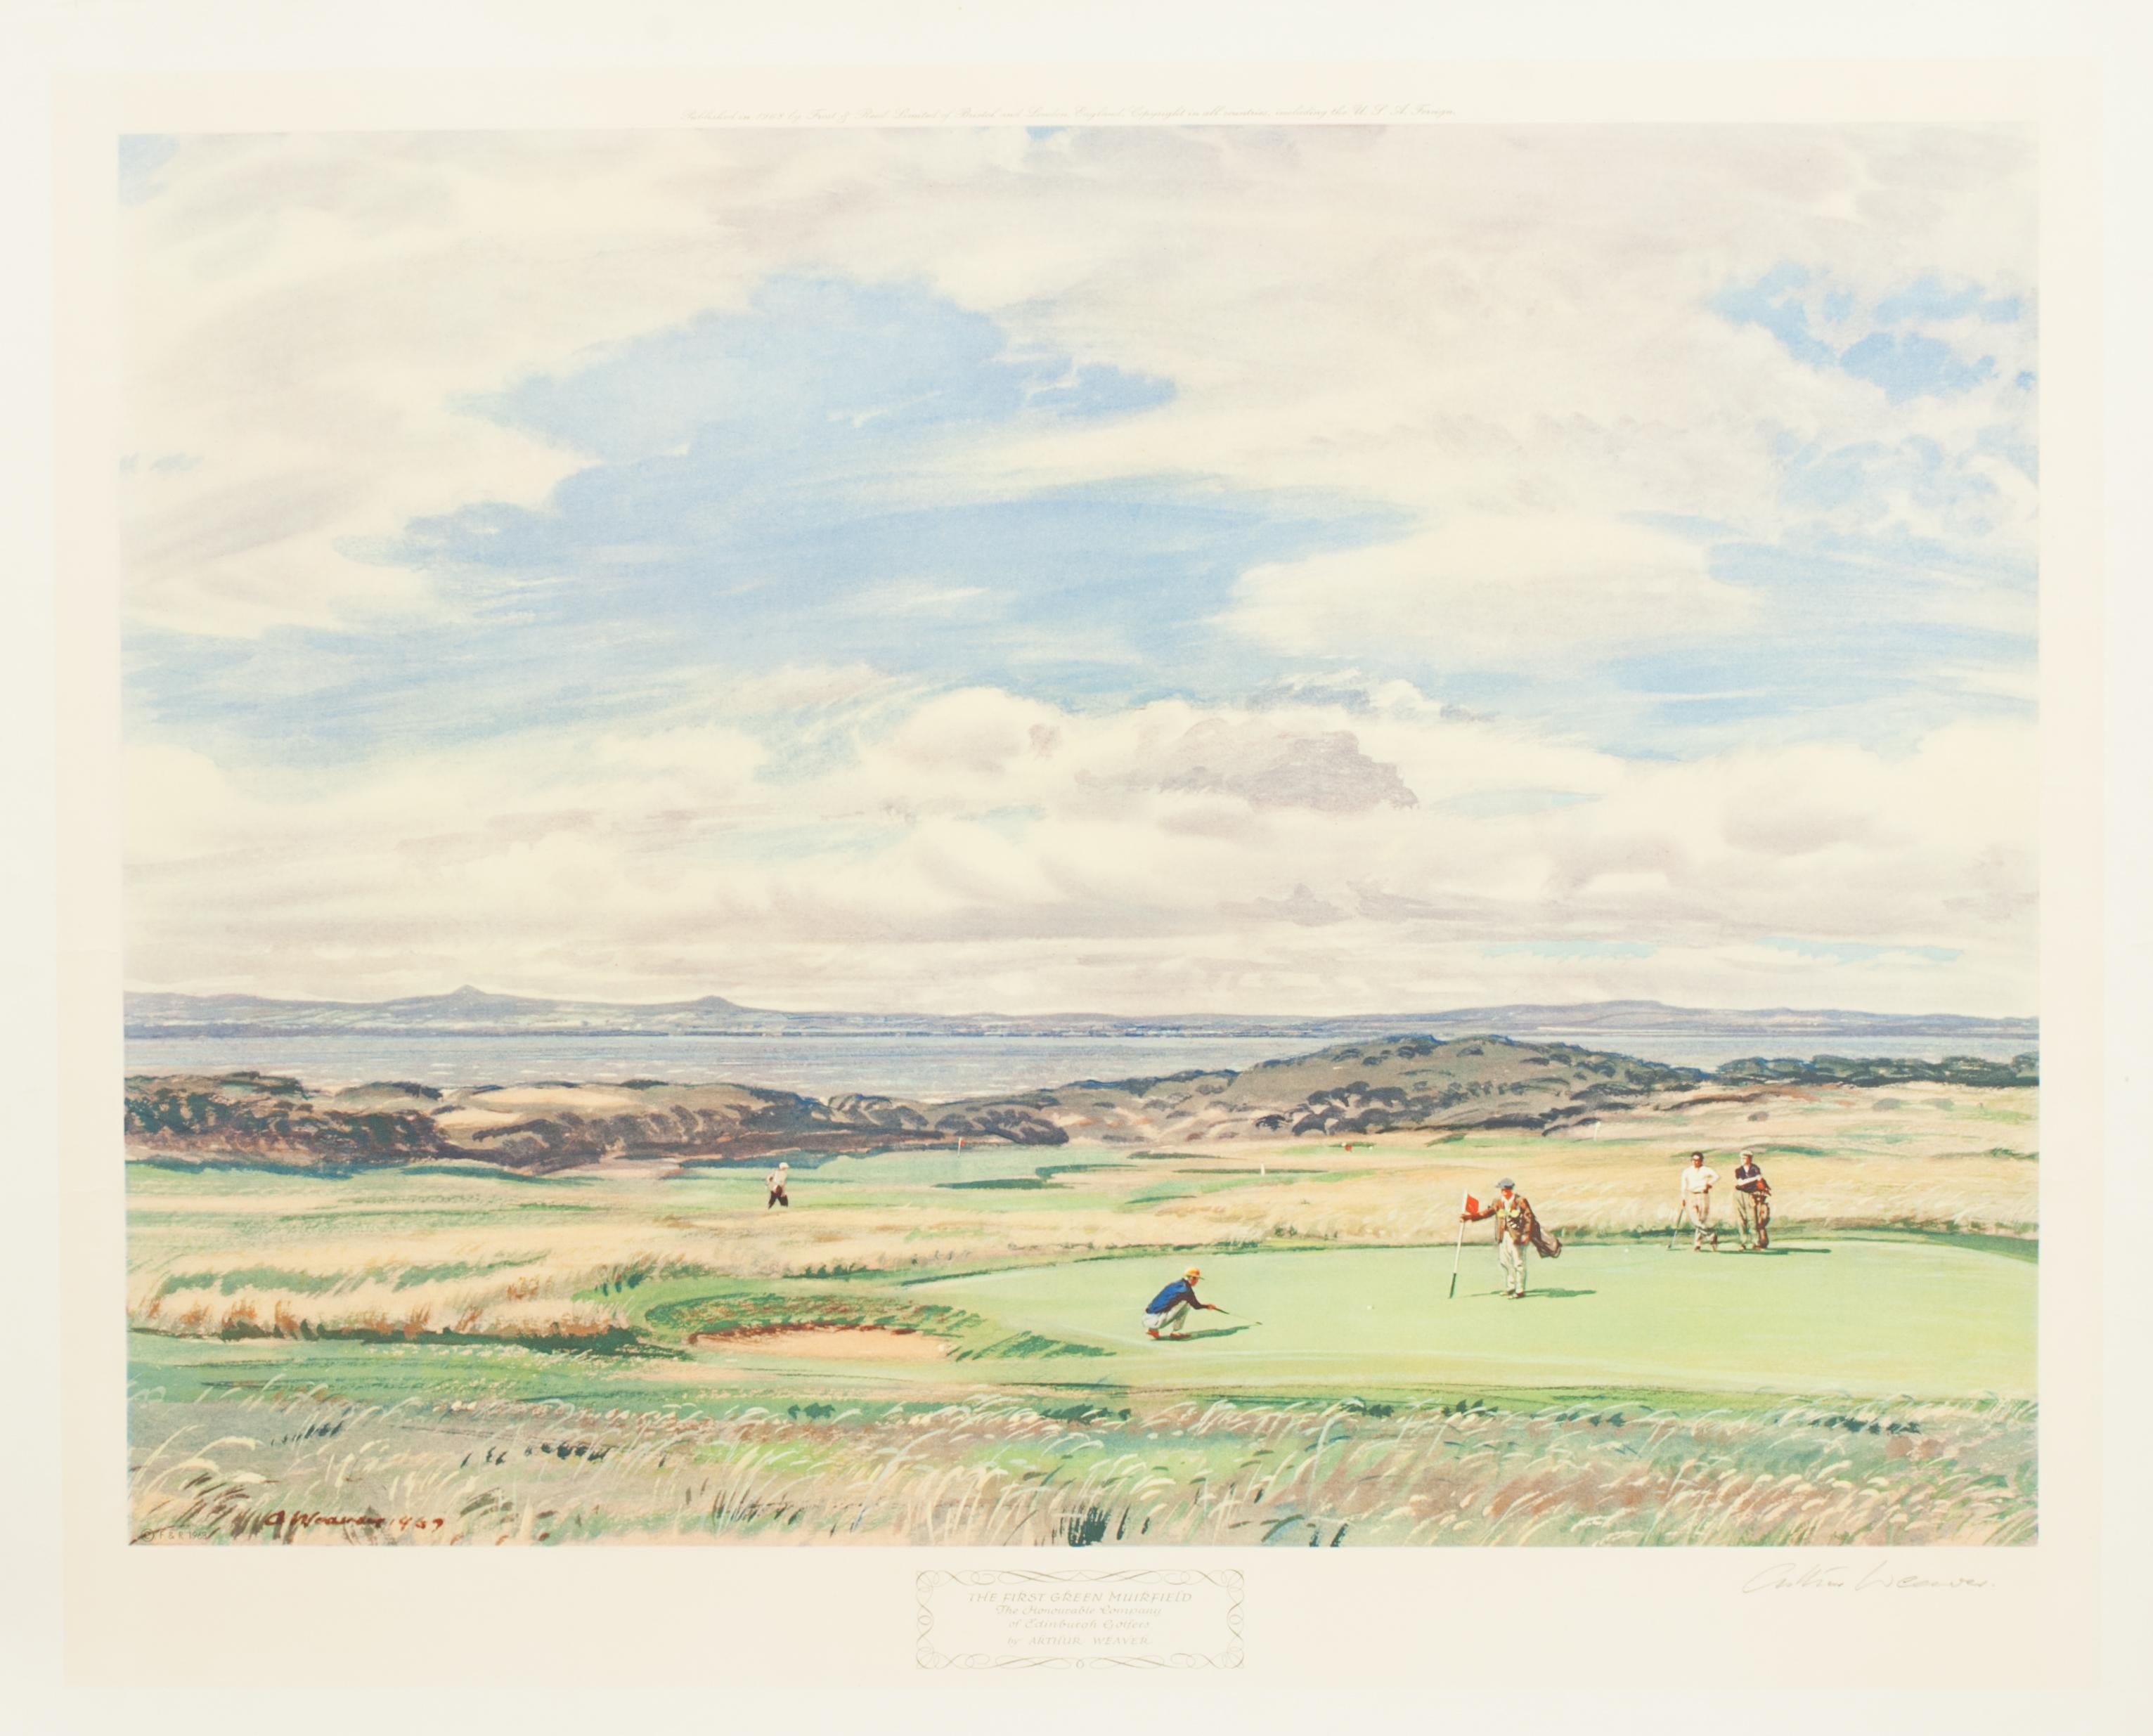 First Green Muirfield By Arthur Weaver.
A colourful golf lithograph signed by the artist, Arthur Weaver, First Green Muirfield, The Honourable Company Of Edinburgh Golfers. Published in 1968 by Frost & Reed Limited of Bristol and London, England.